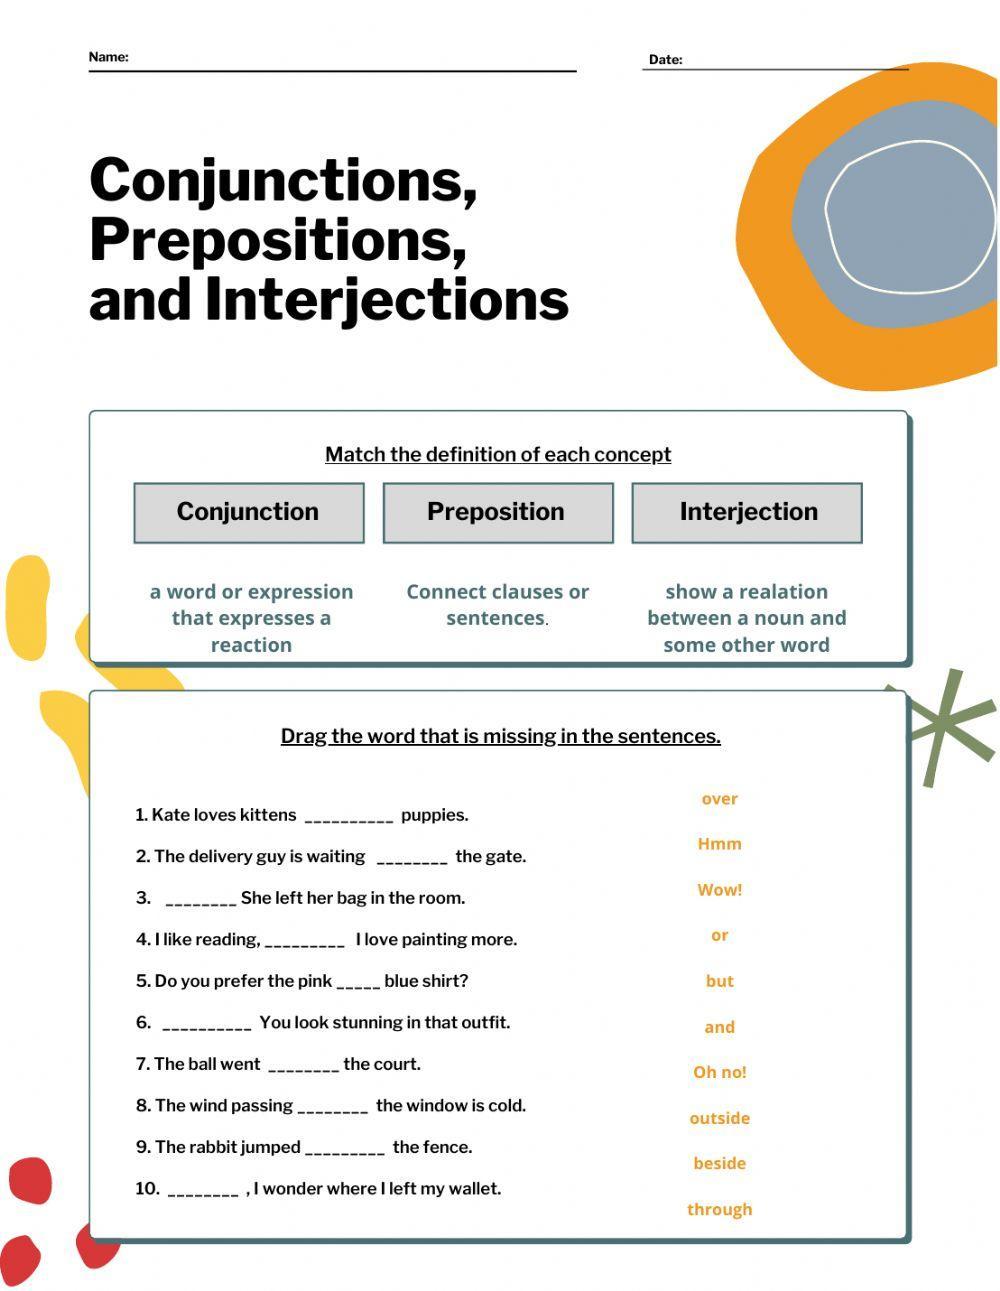 Conjuction, preposition and interjection